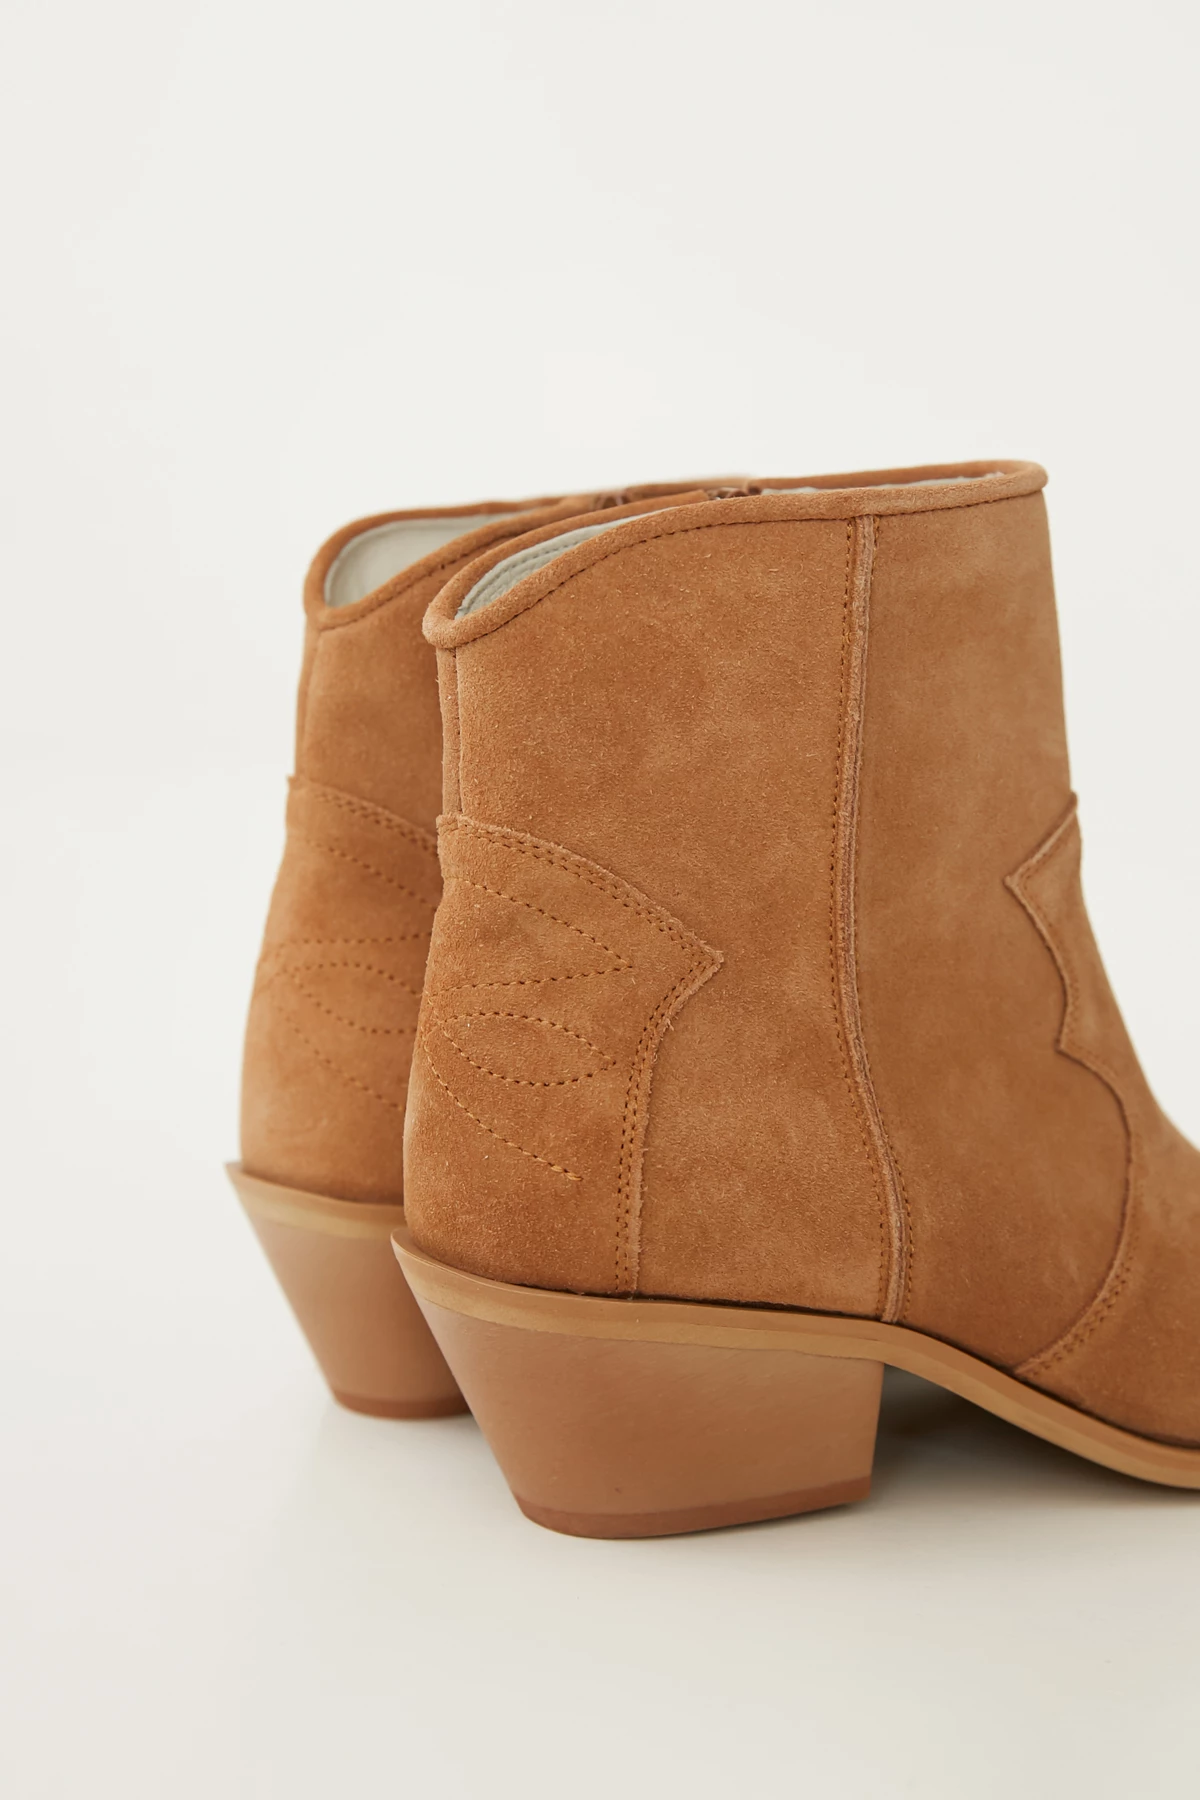 Suede camel сowboy boots, photo 3